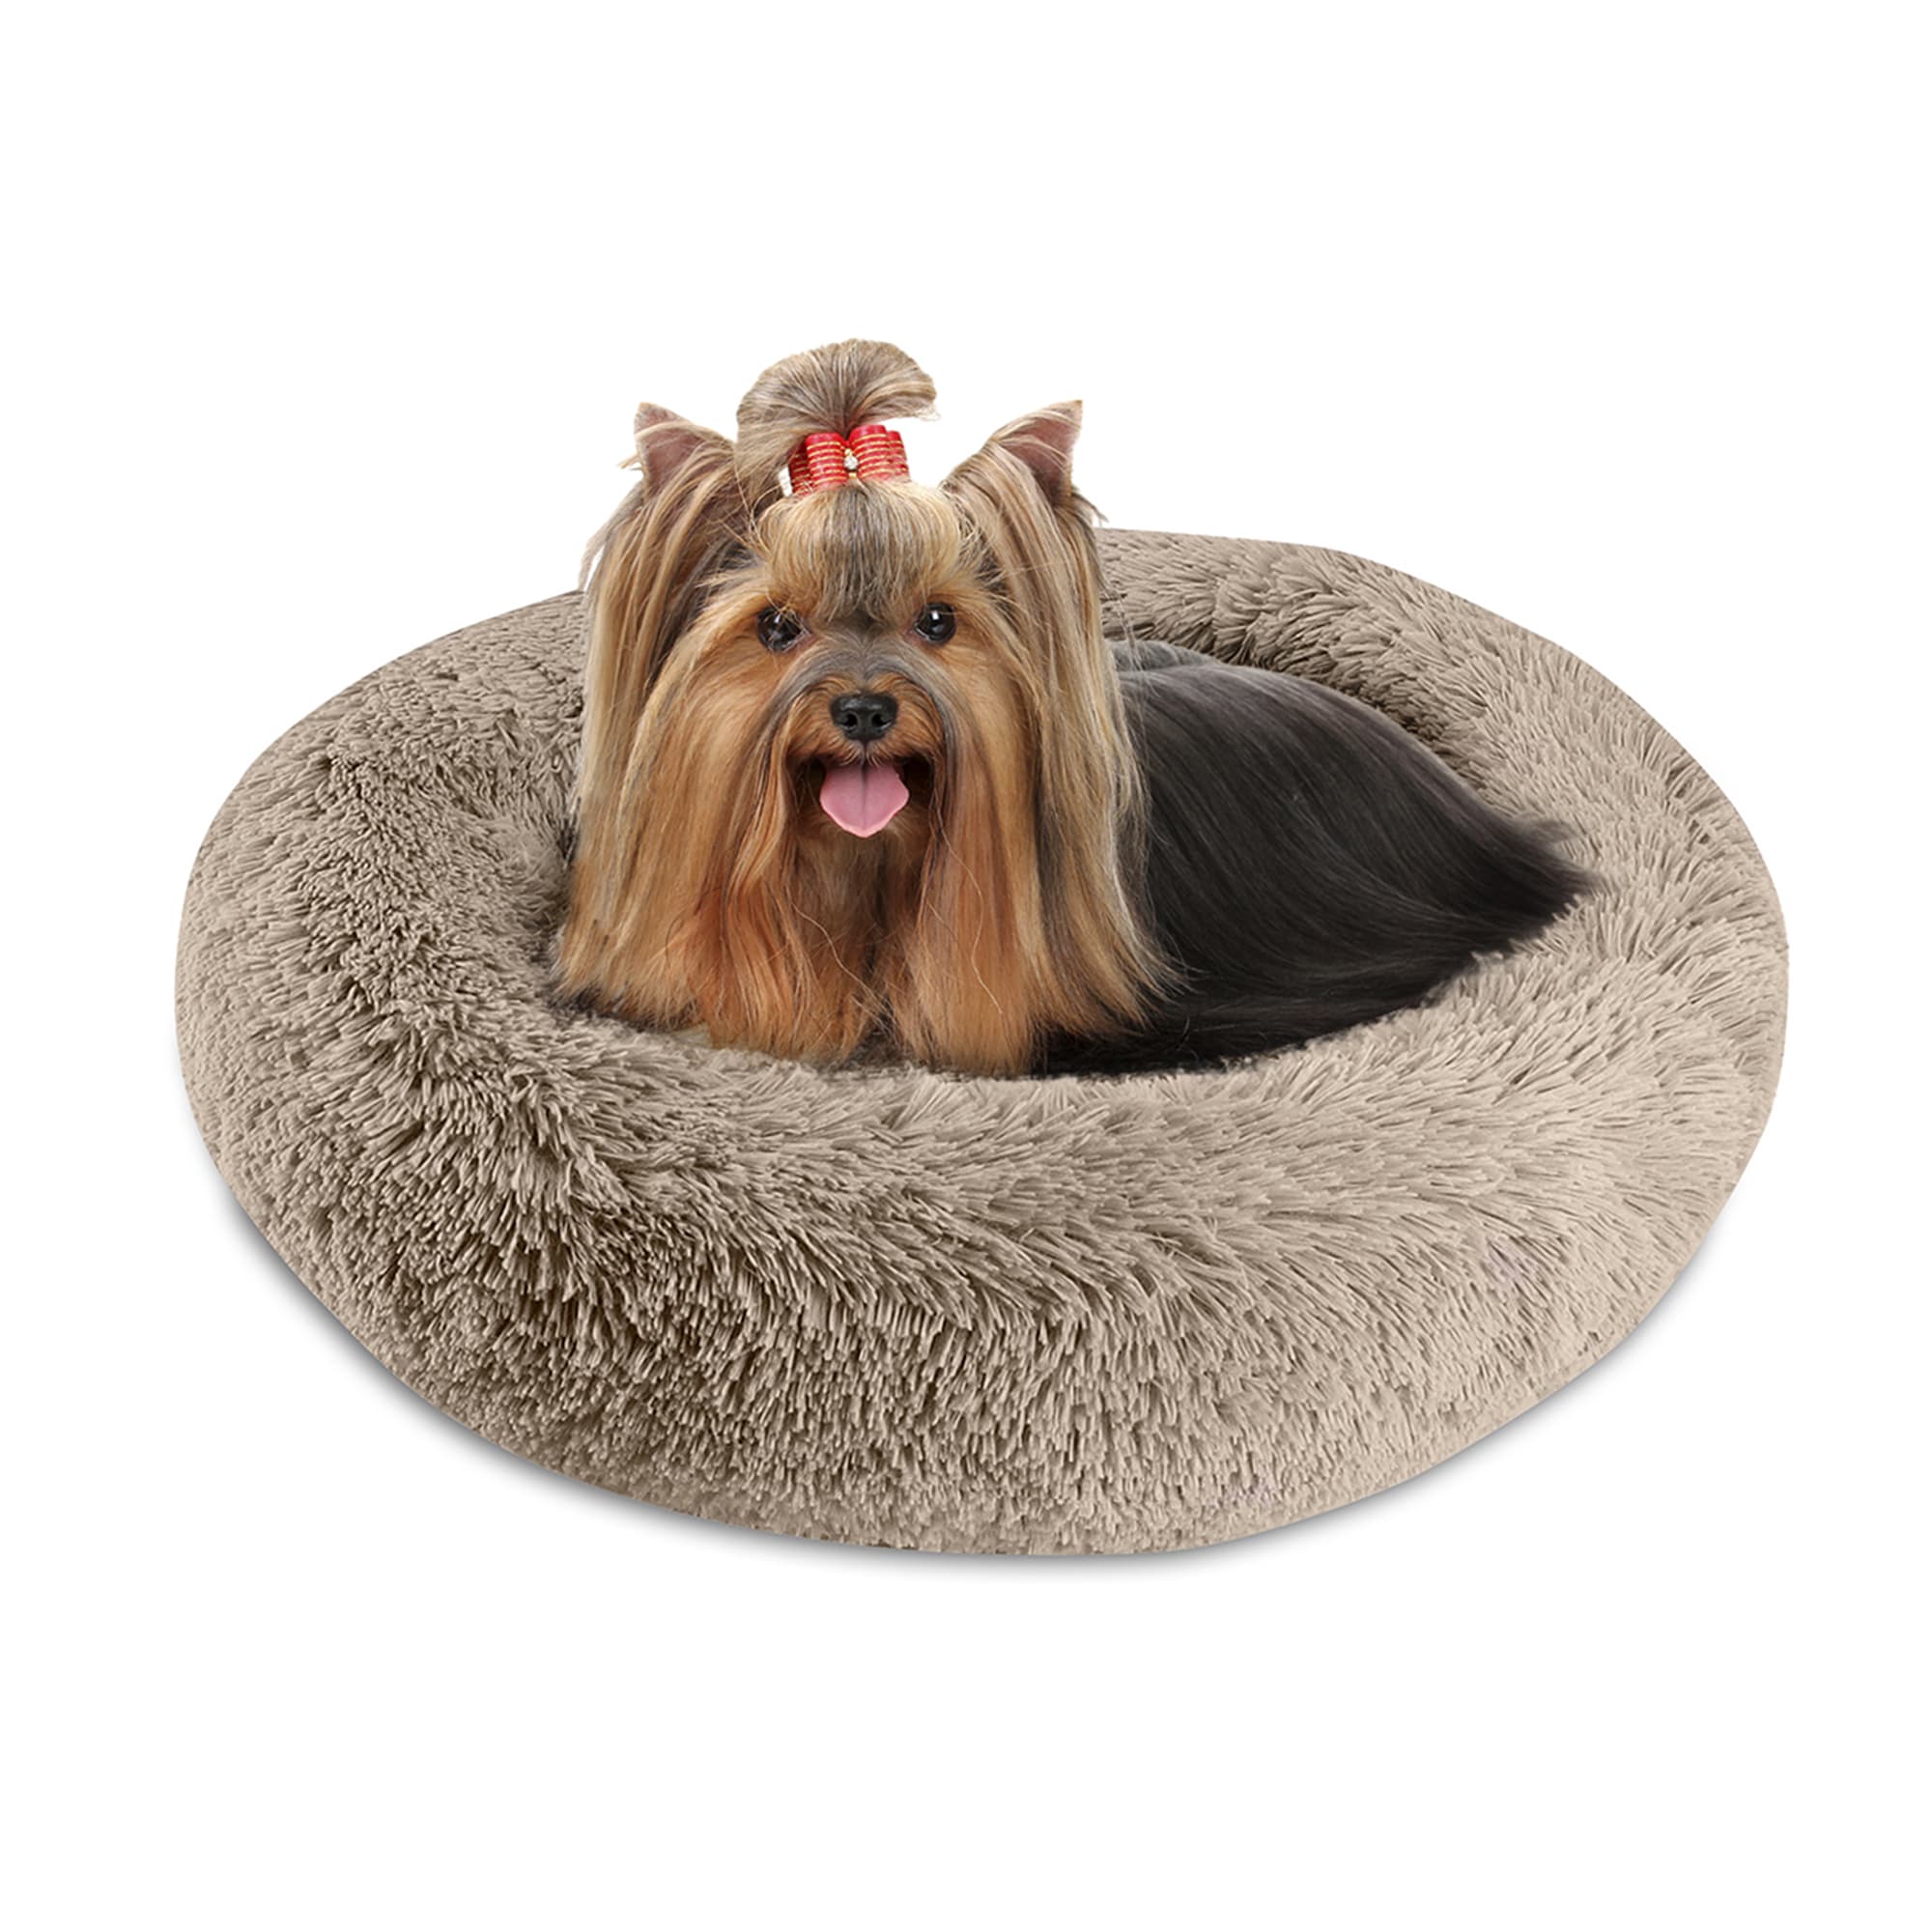 Photos - Dog Bed / Basket Pet Napper Pet Napper Taupe Donut Dog Bed, 22" L X 22" W X 8" H, Small, Br